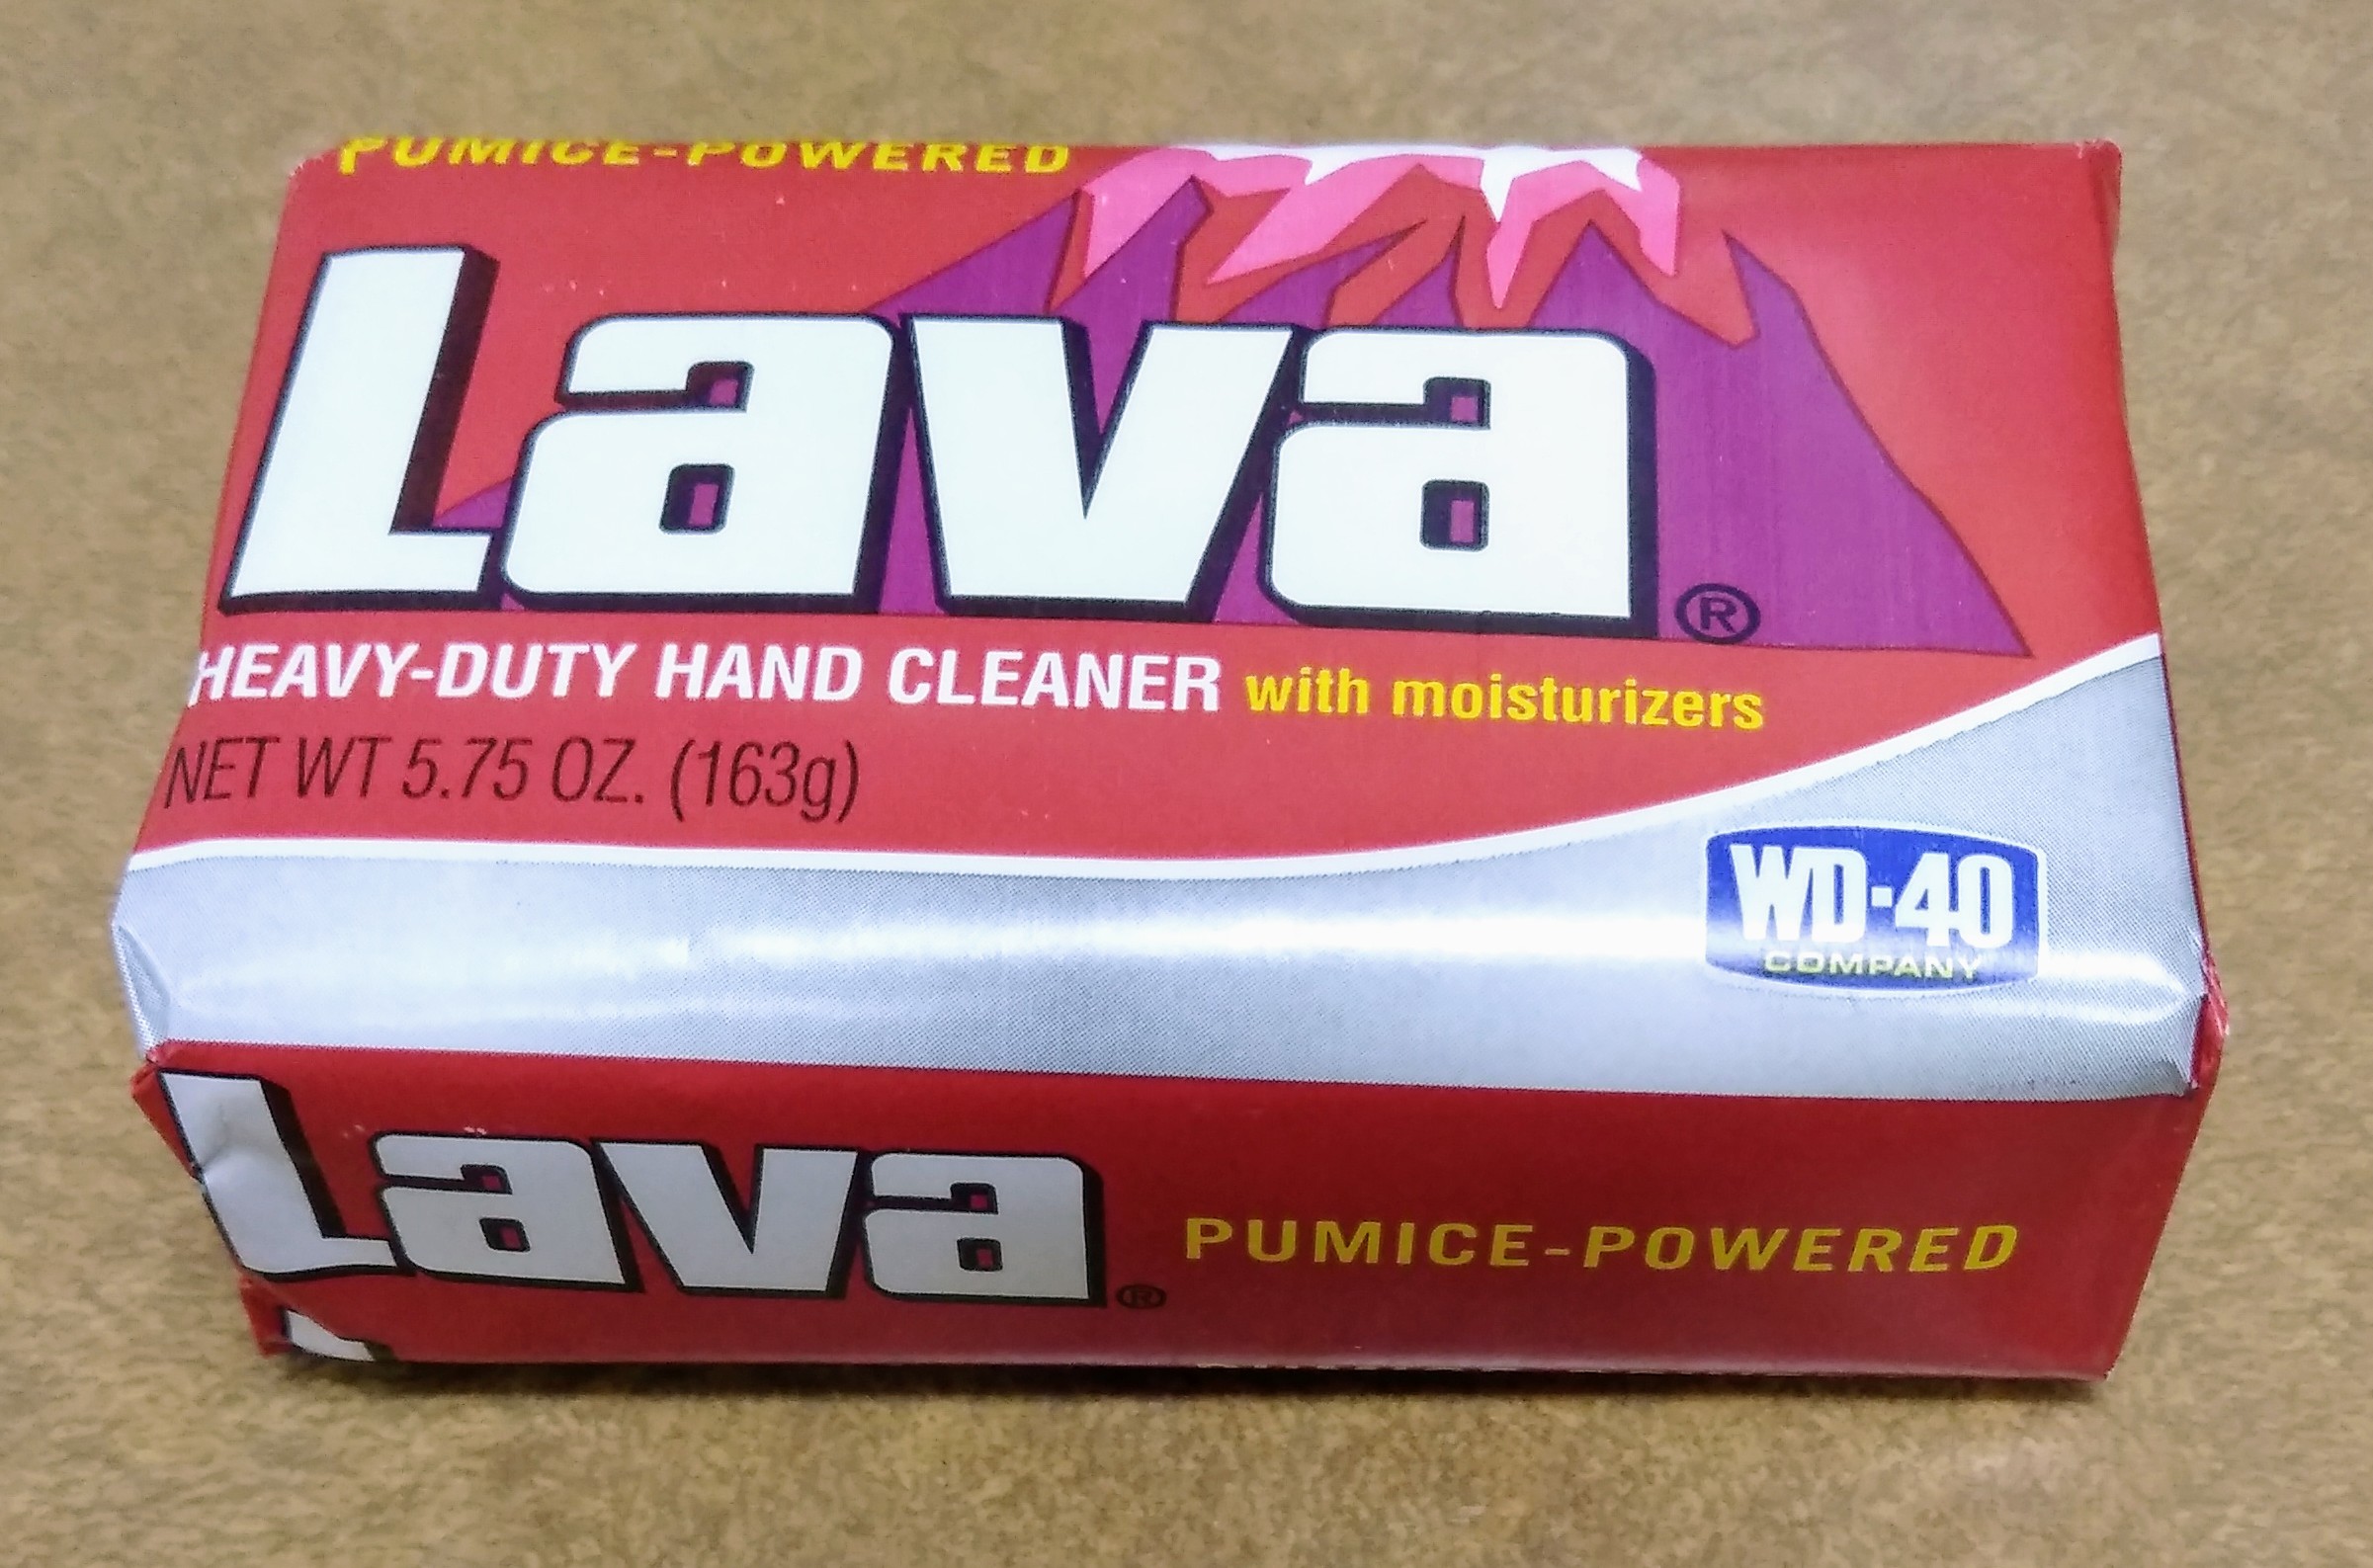 Lava Heavy-Duty Hand Cleaner with Moisturizers, Twin-Pack, 5.75 OZ